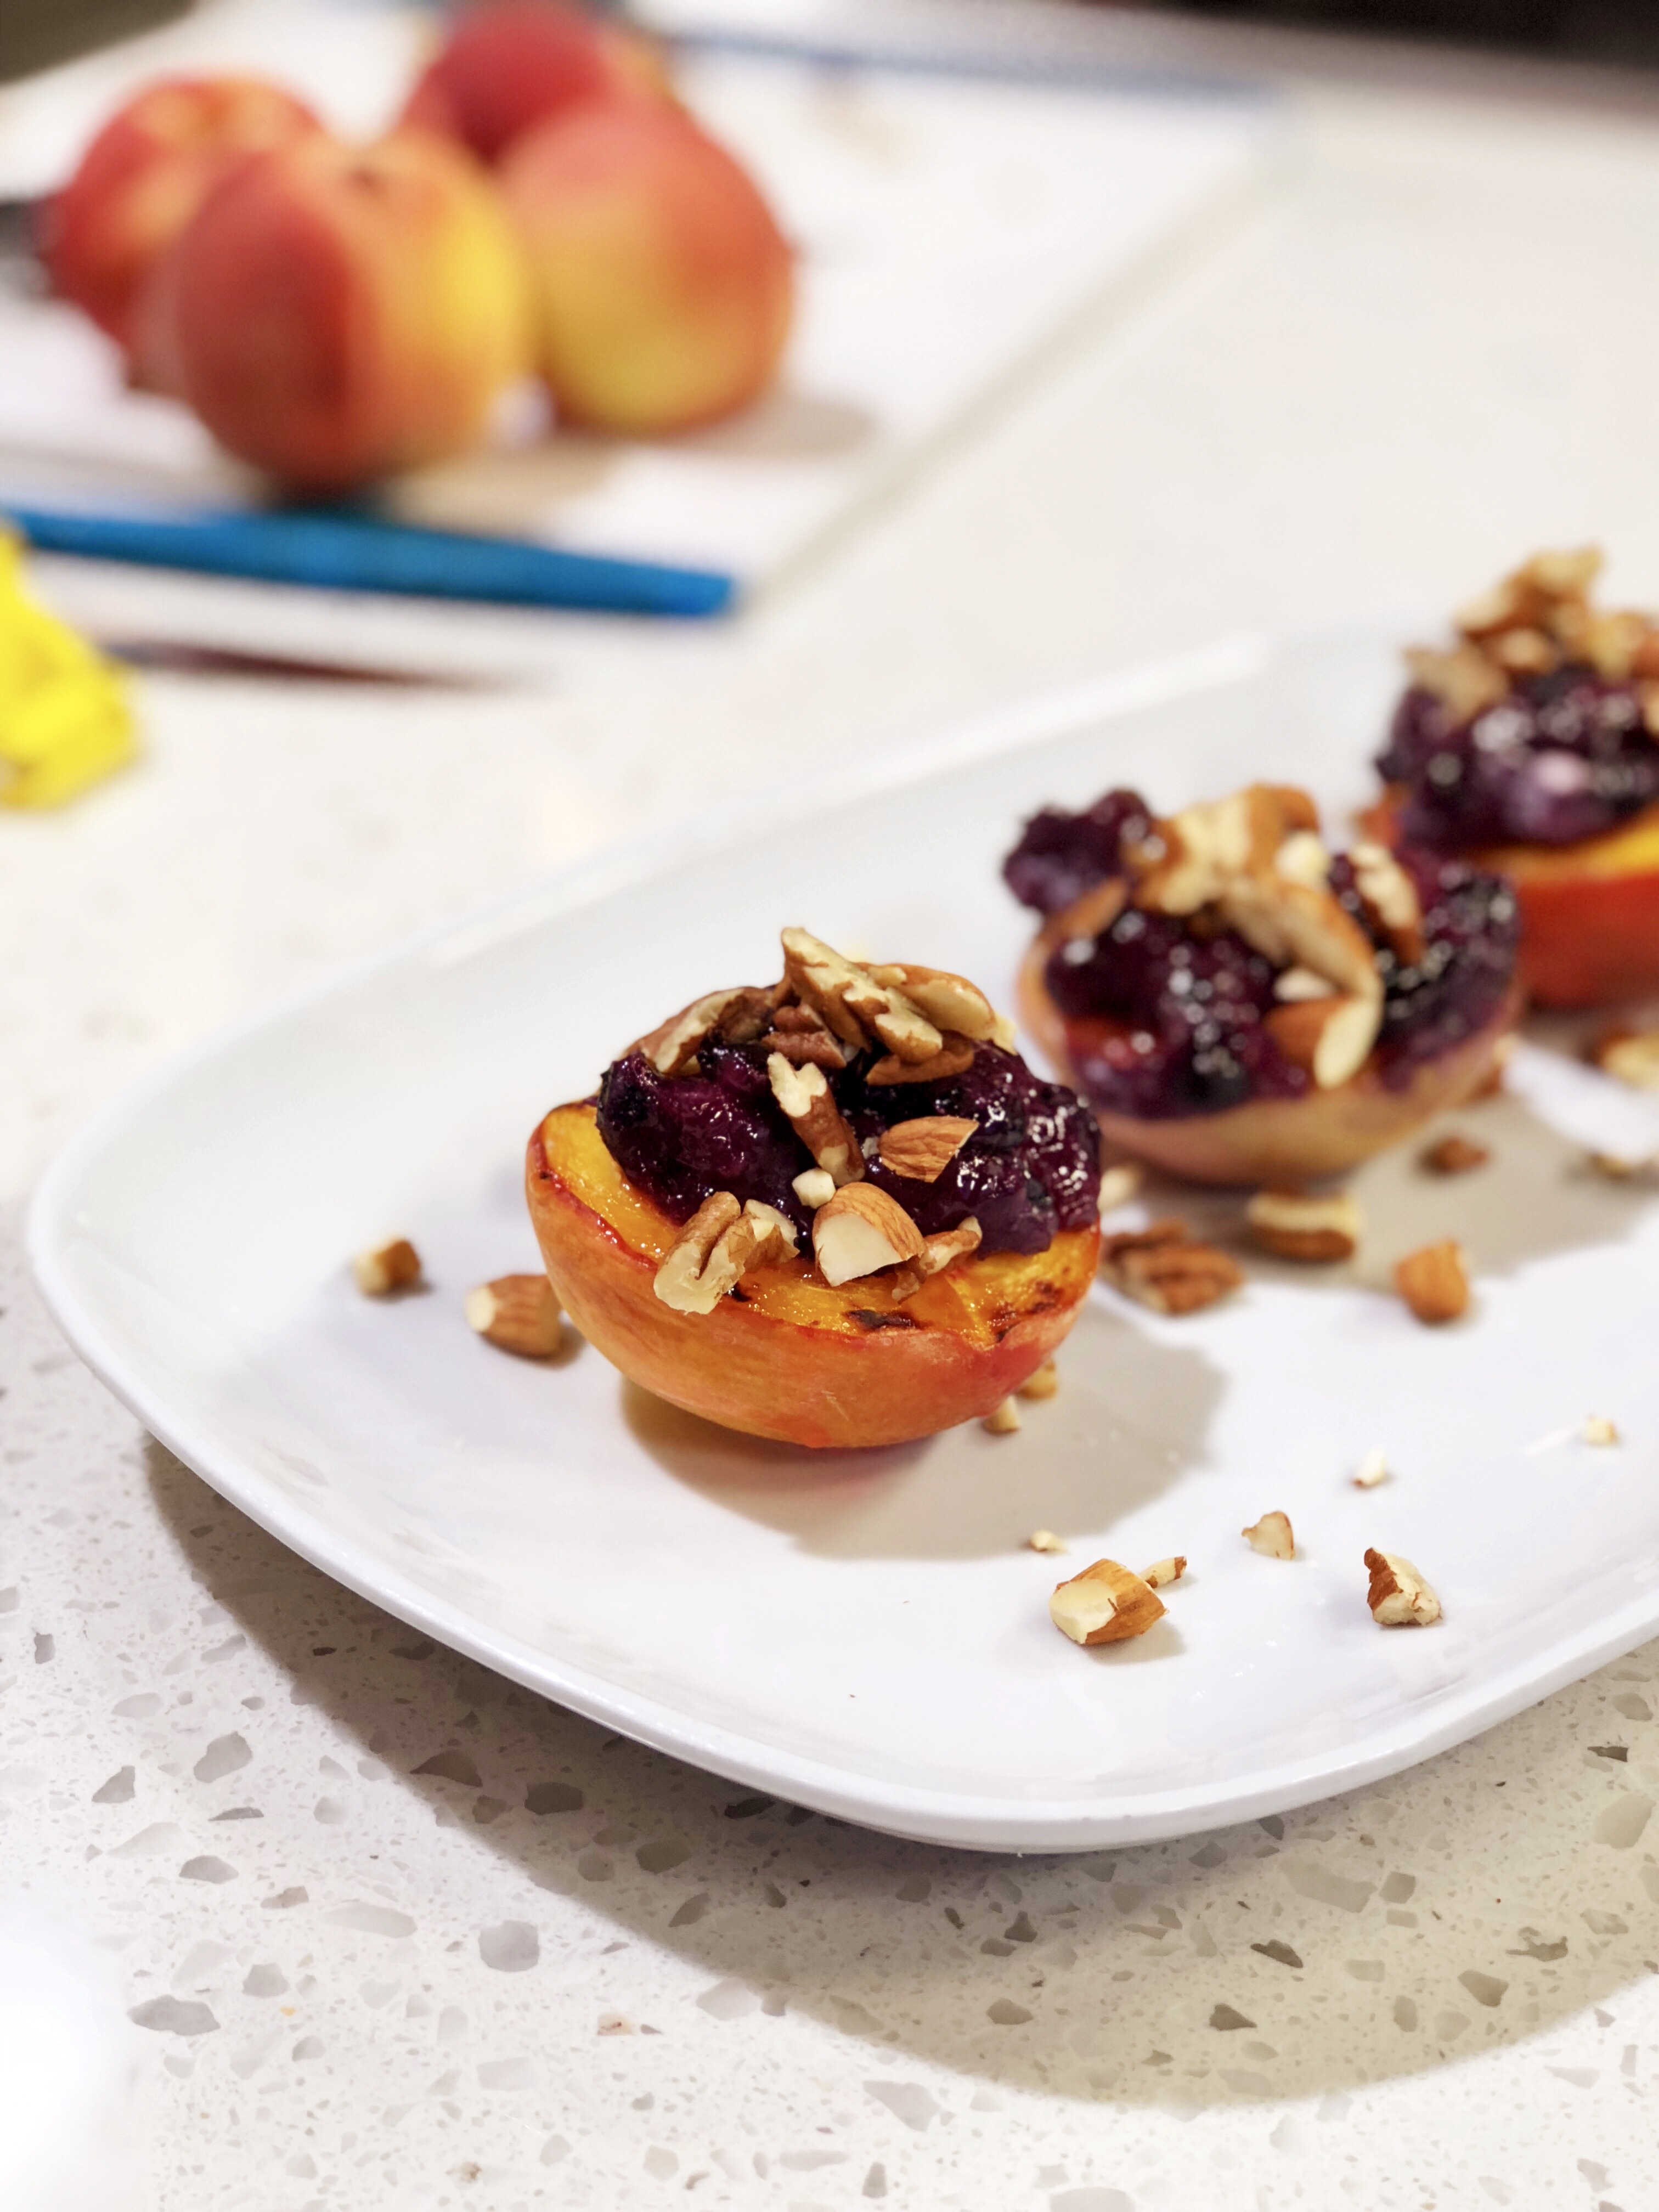 Glazed Peaches, Broiled with Blueberry Compote and Cream Cheese